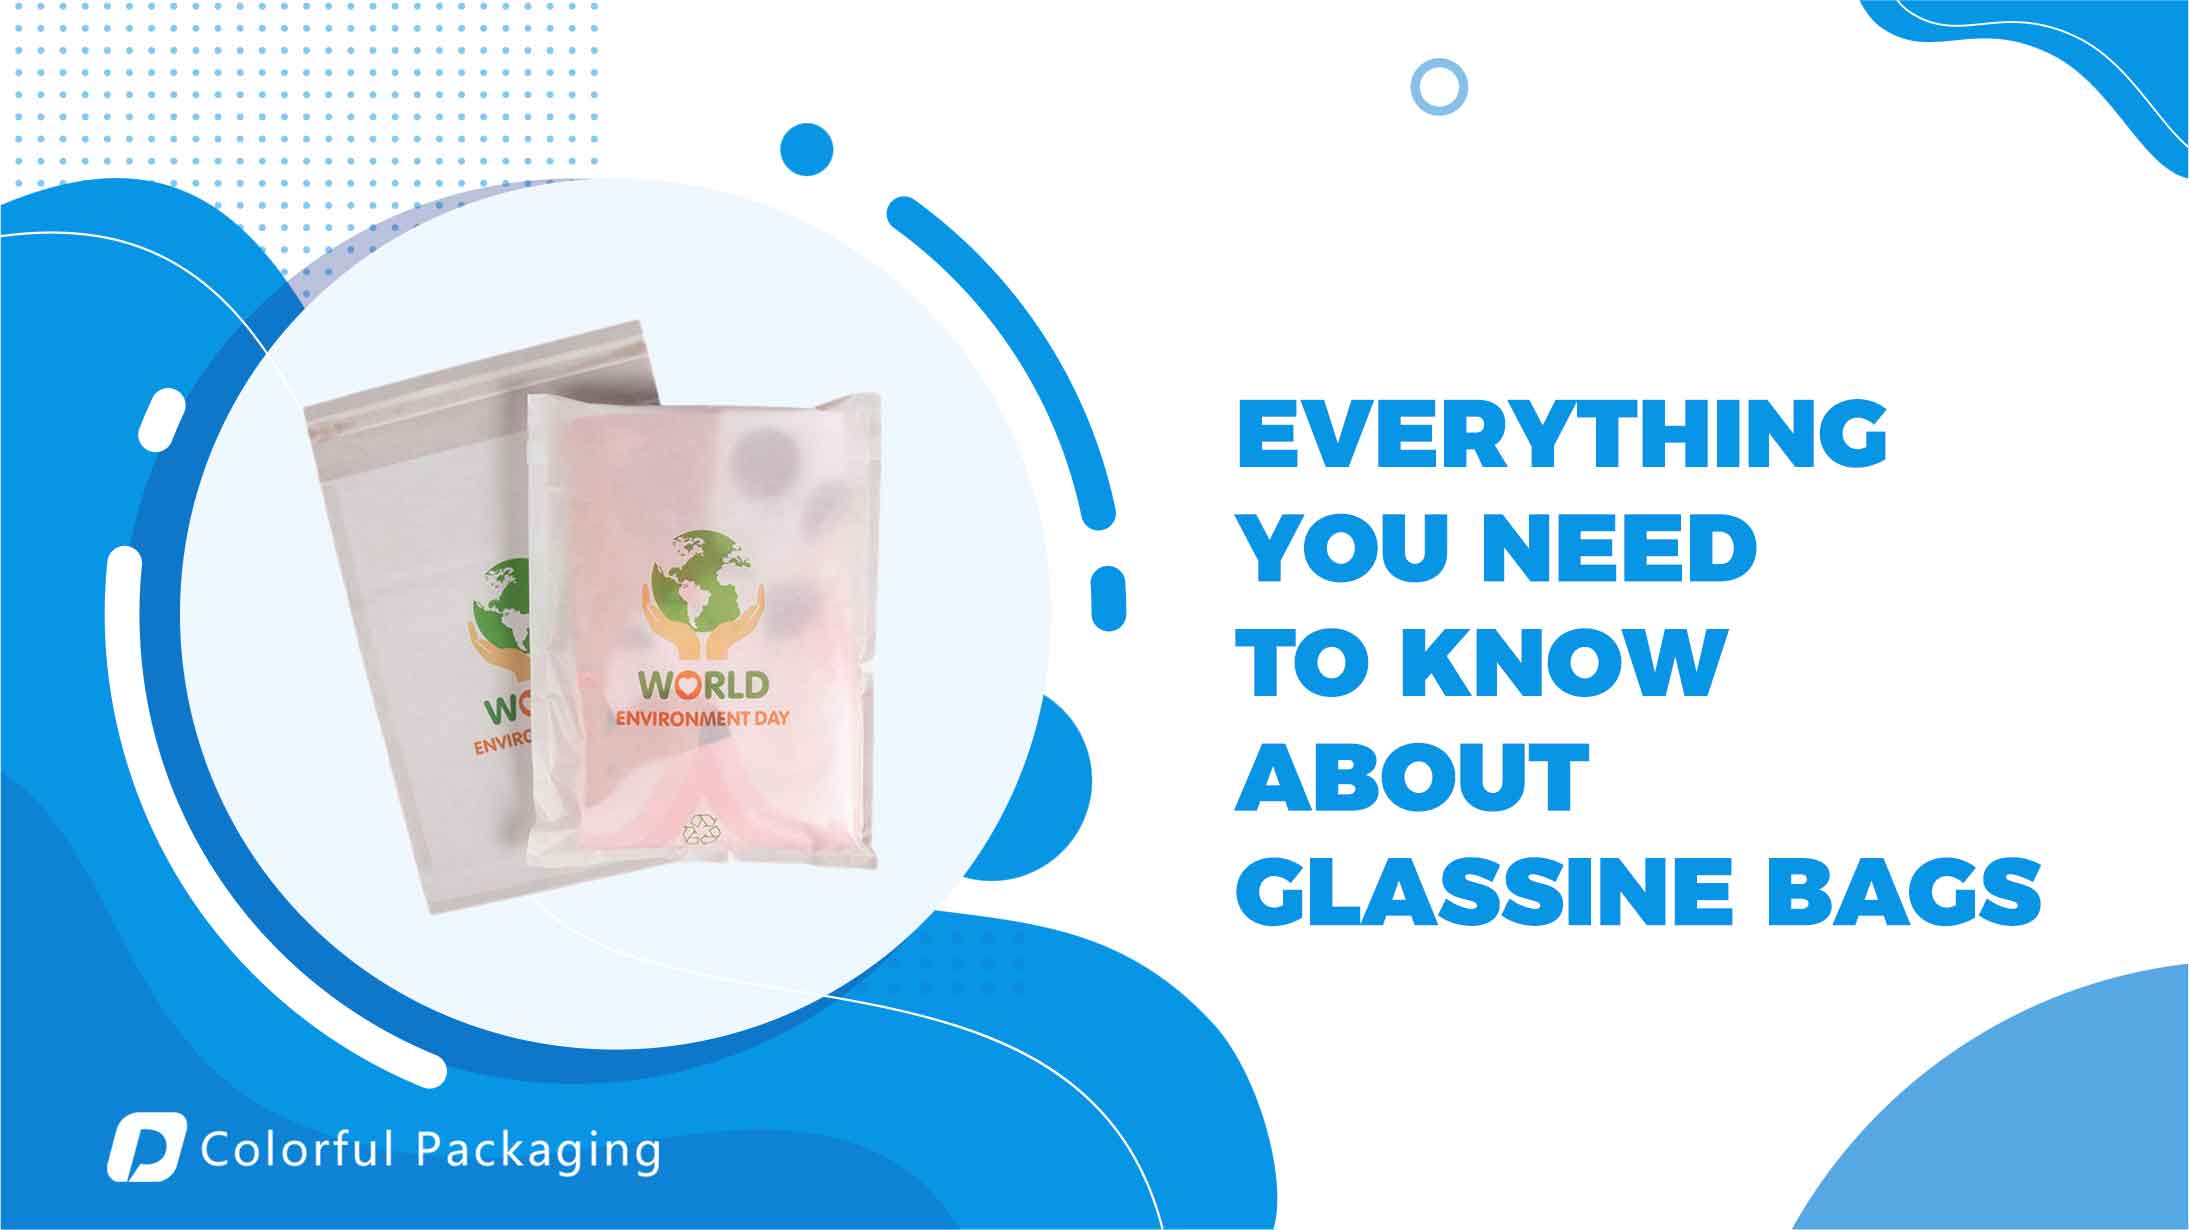 Everything you need to know about Glassine Bags